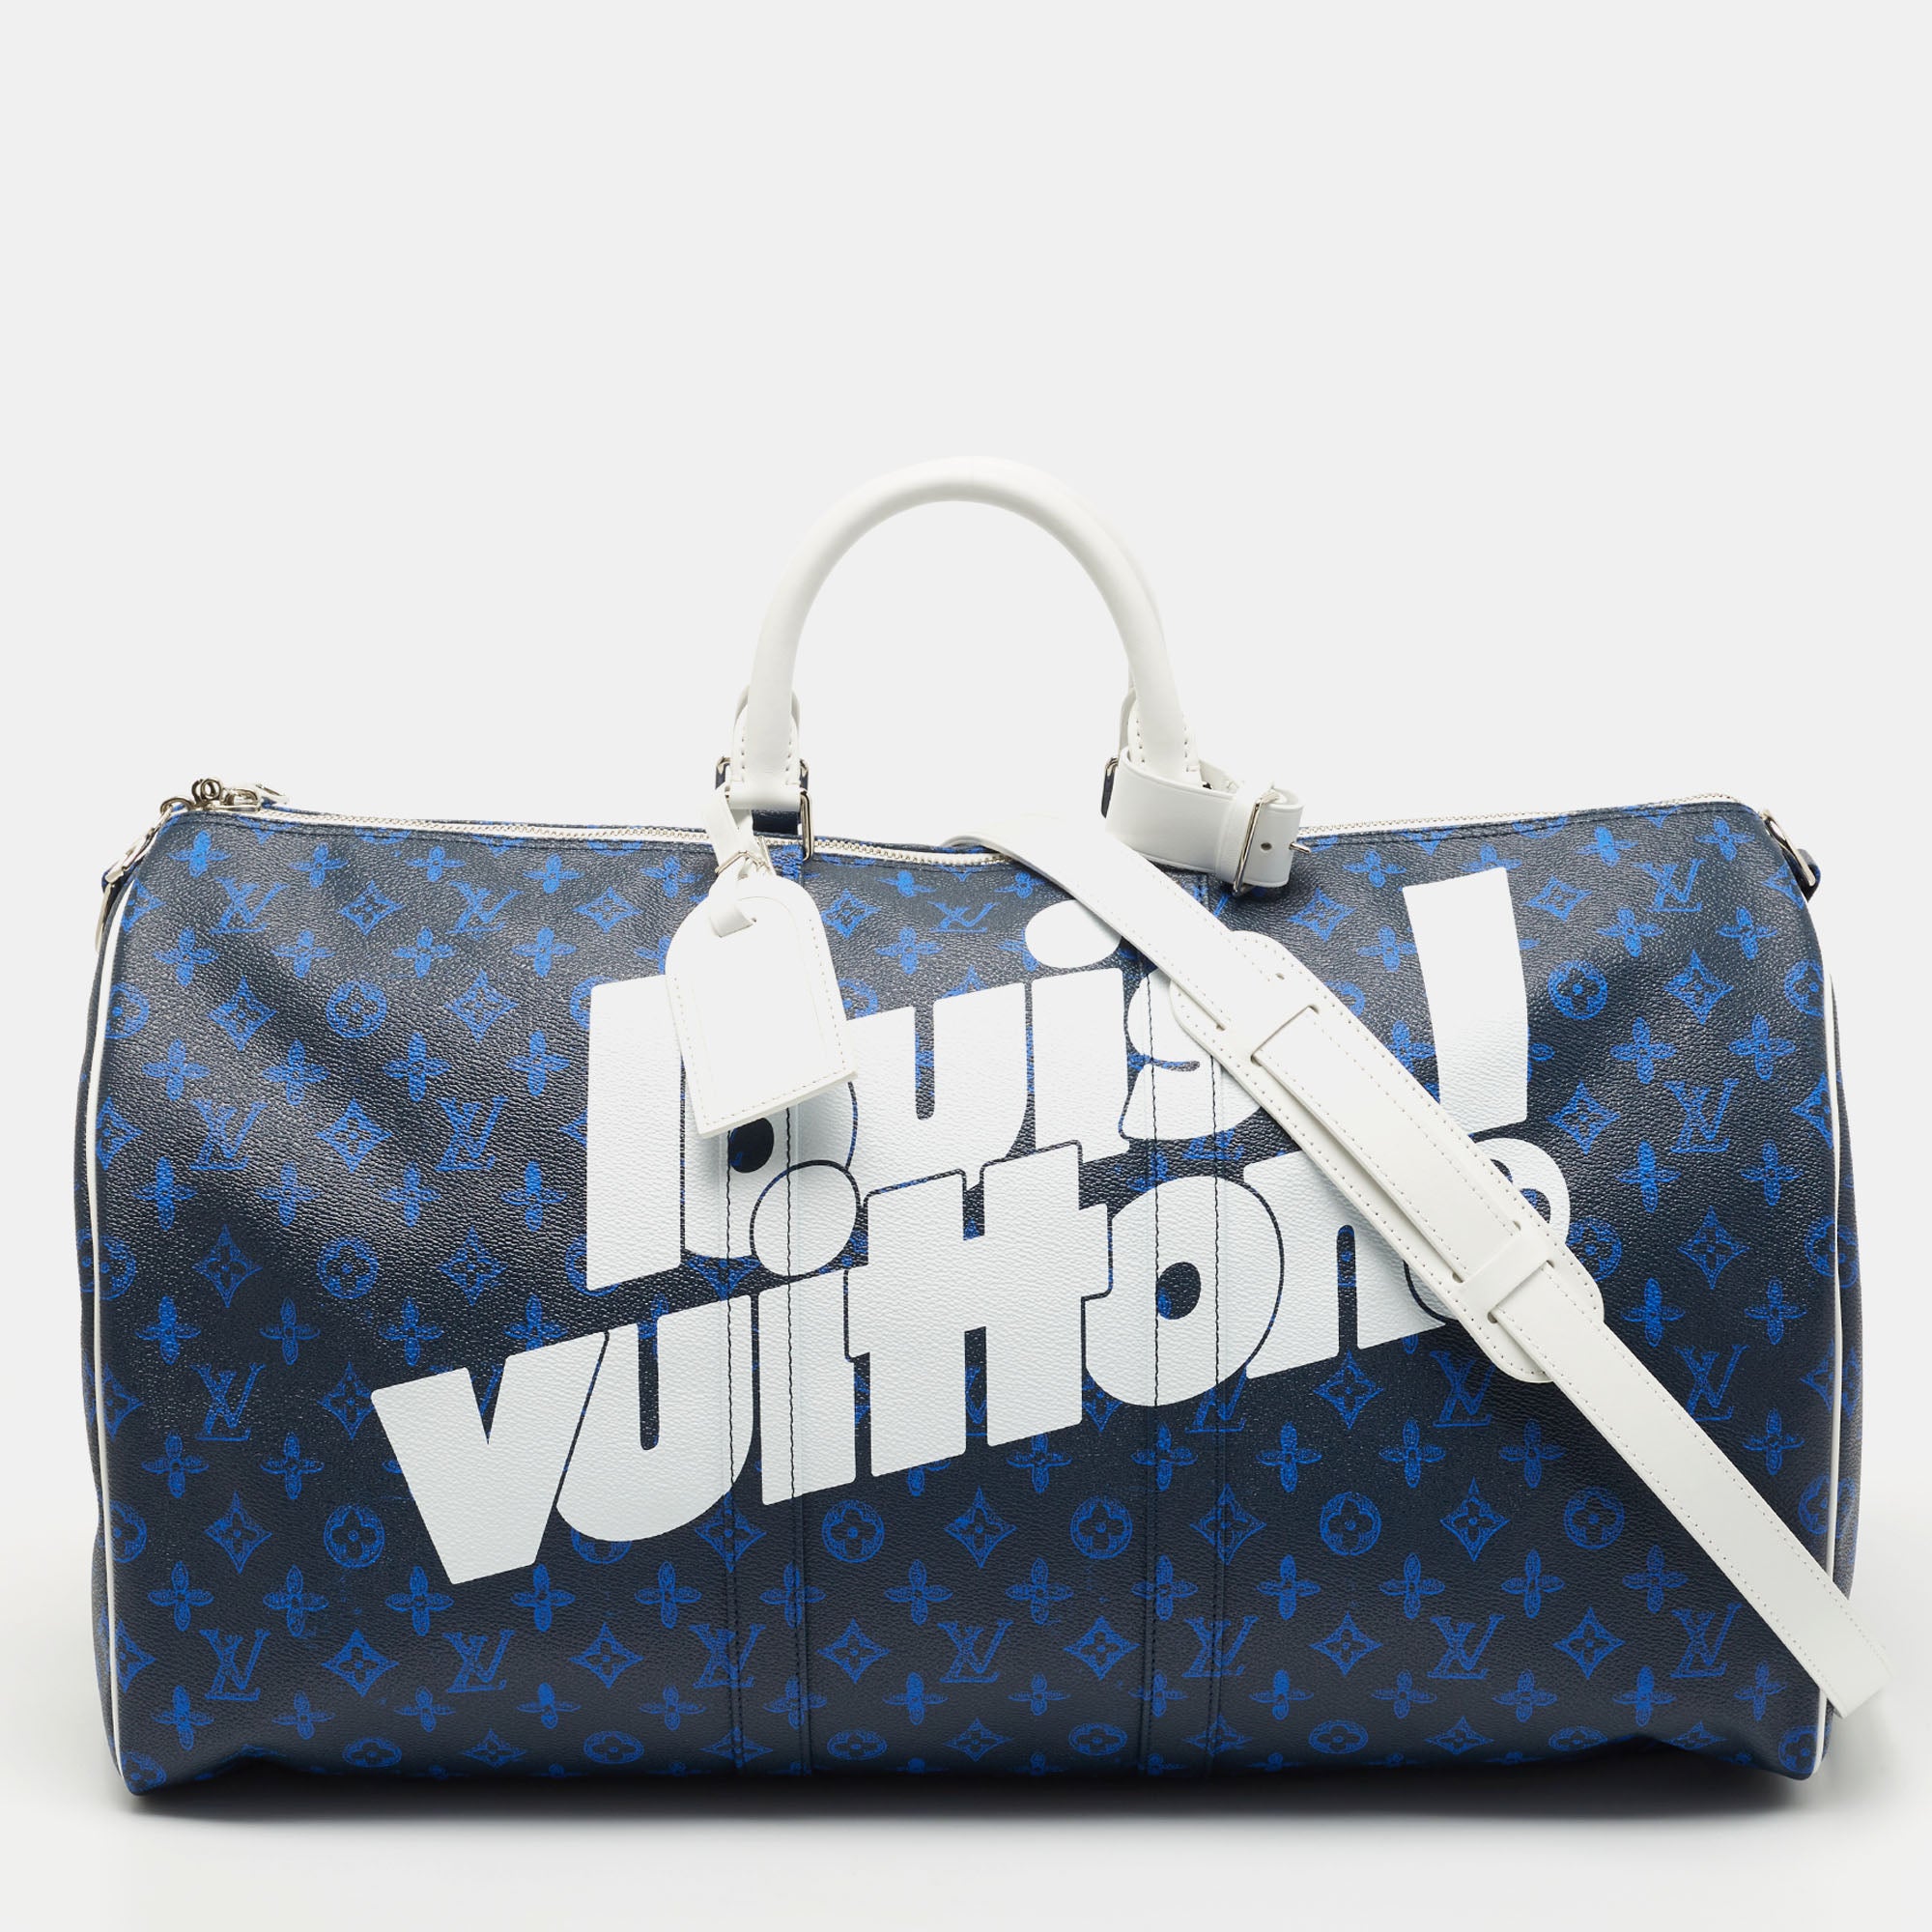 Louis Vuitton Keepall Bandouliere Bag Limited Edition Monogram